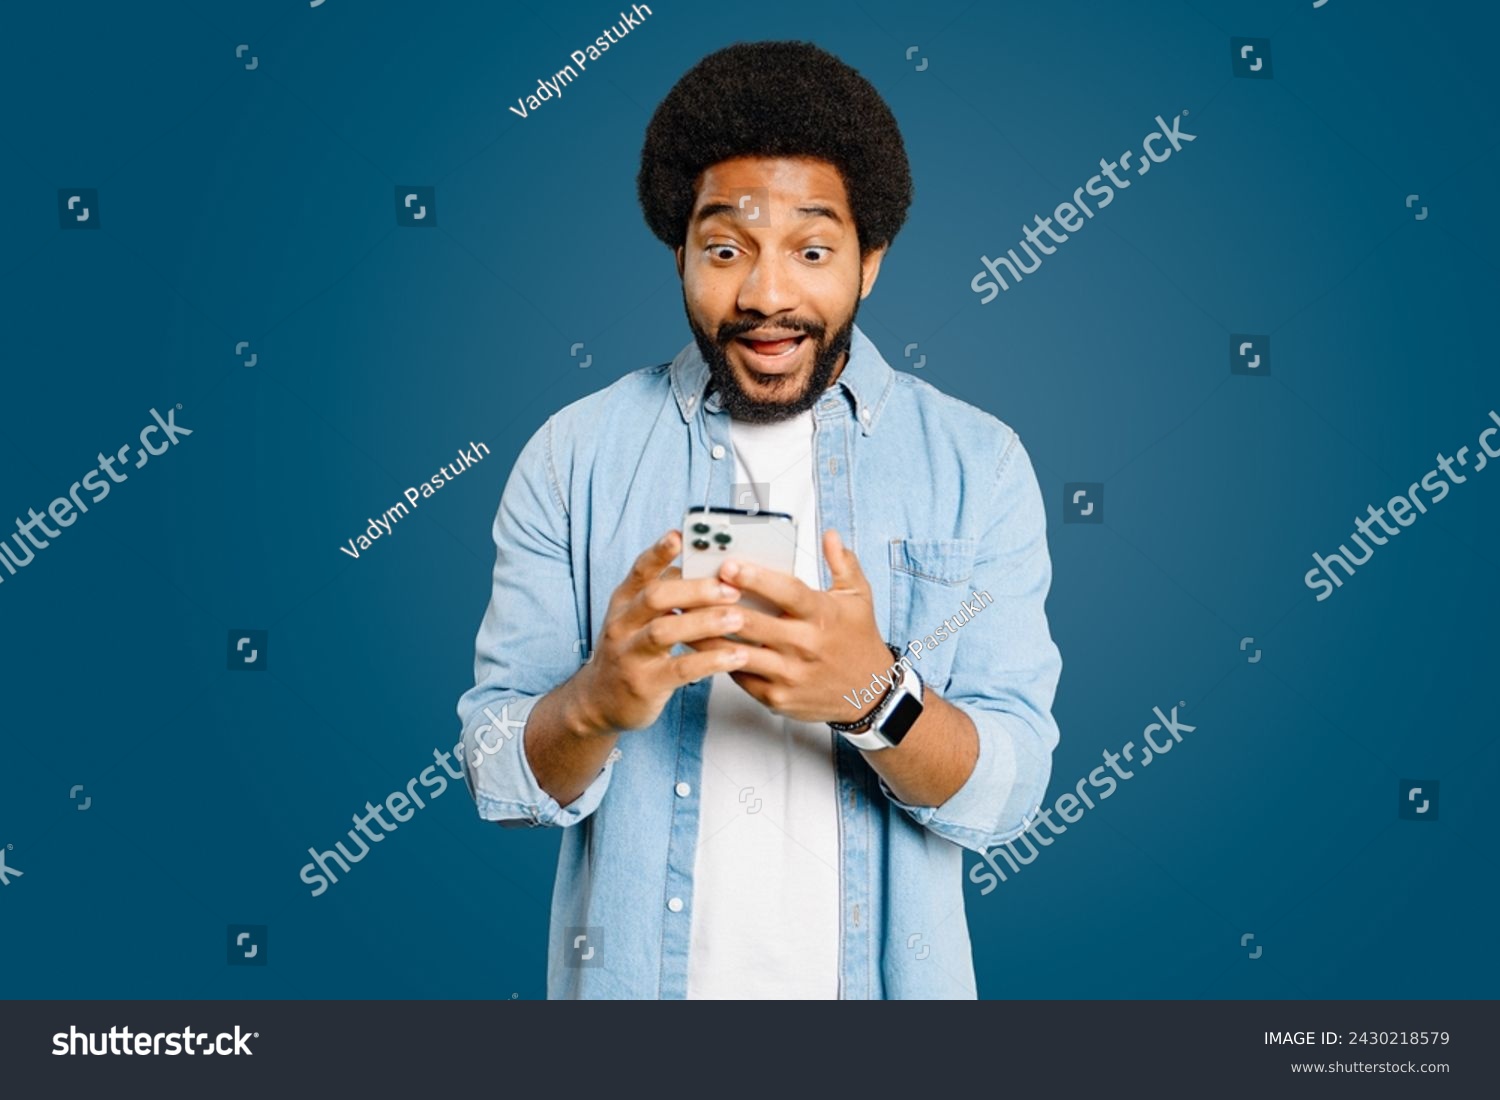 Young man looks surprised and excited using a smartphone, embodying a spontaneous moment of receiving unexpectedly good news, perfect for representing instant communication and its impact on emotions #2430218579